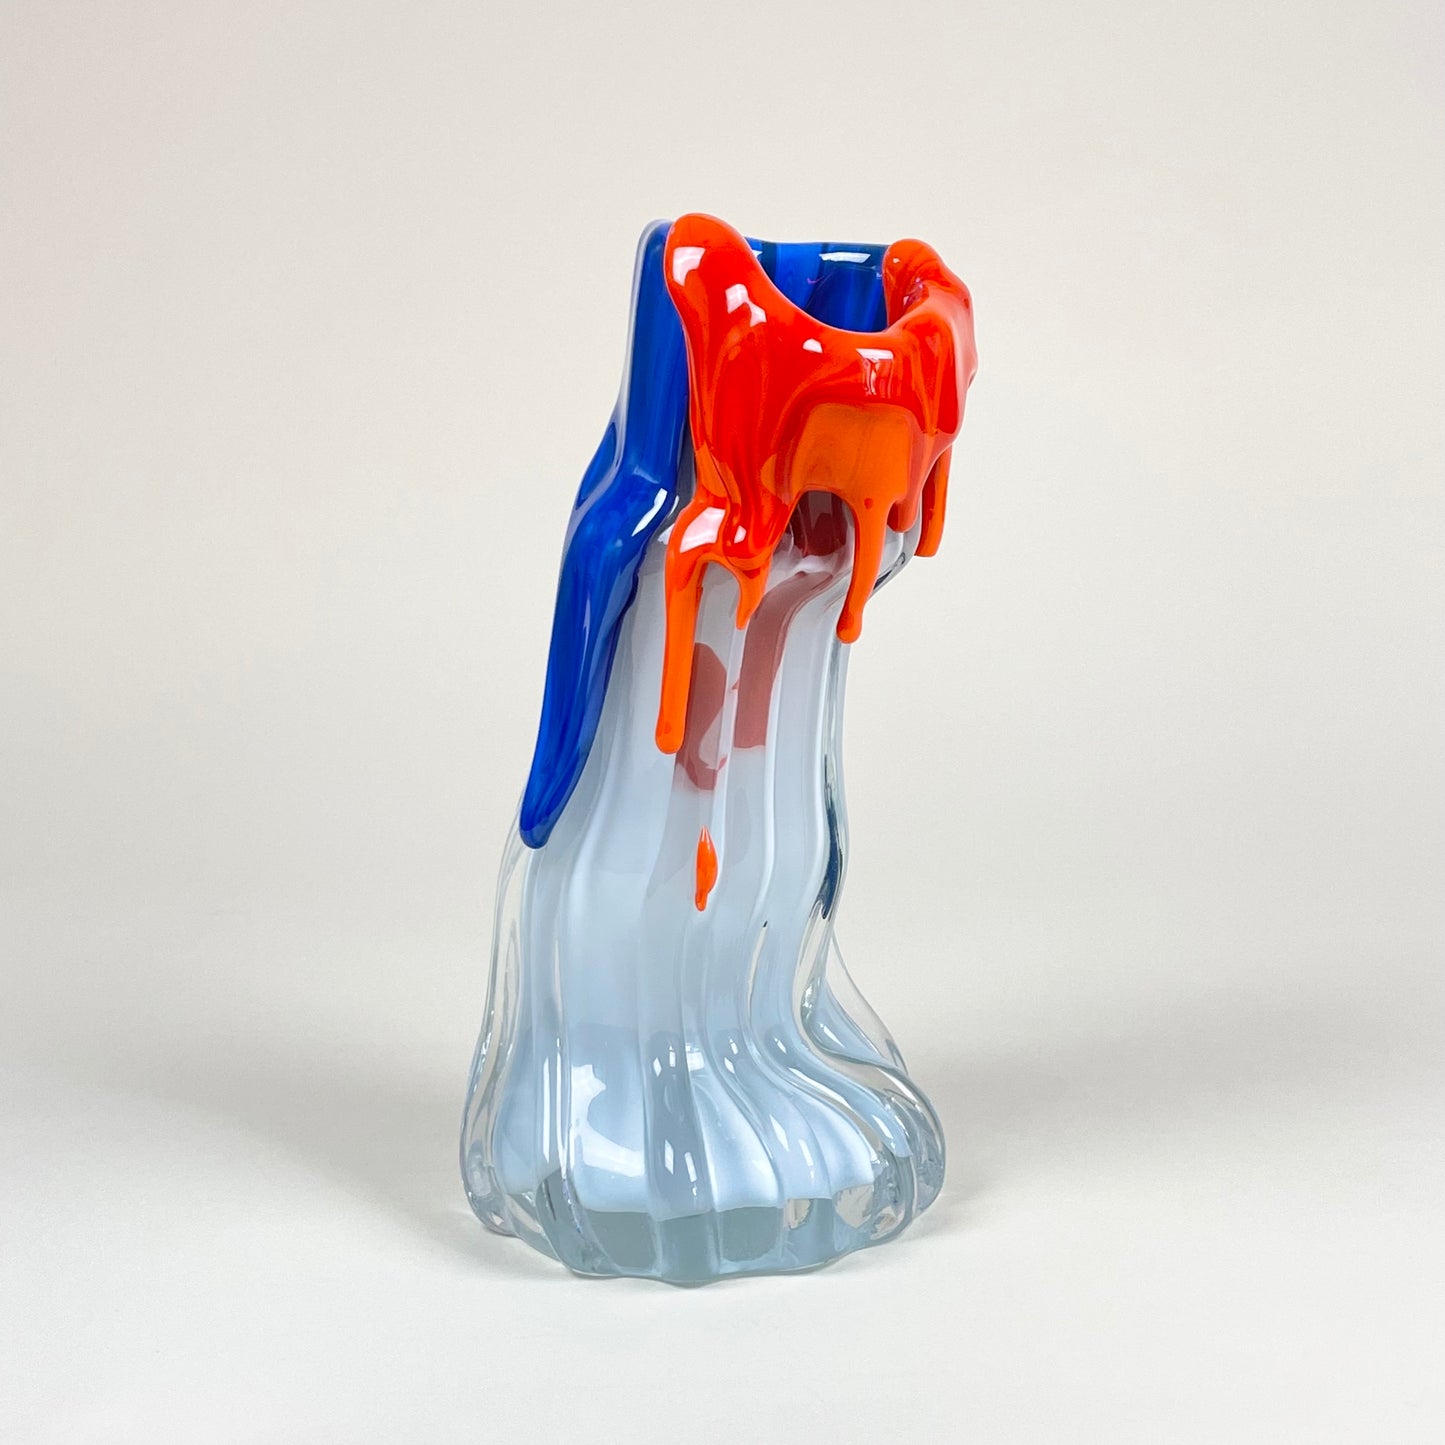 Mouthblown glass vessel  "Hekla" (white, red and blue) by Silje Lindrup